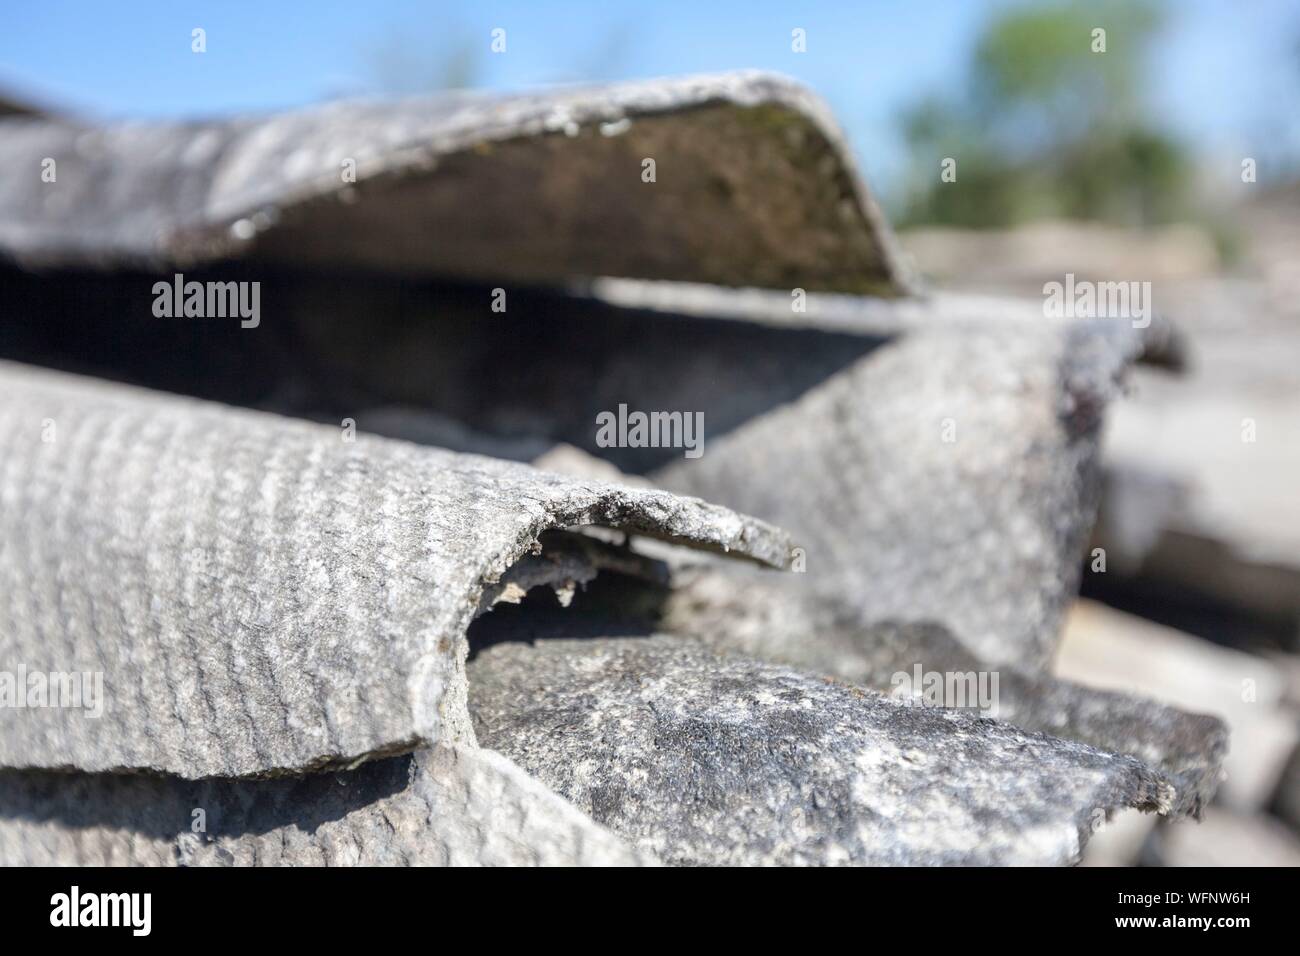 France, Vienne, Chatellerault, demolition site with an asbestos issue, close up view of the broken and fibrous slice of corrugated asbestos cement sheets Stock Photo